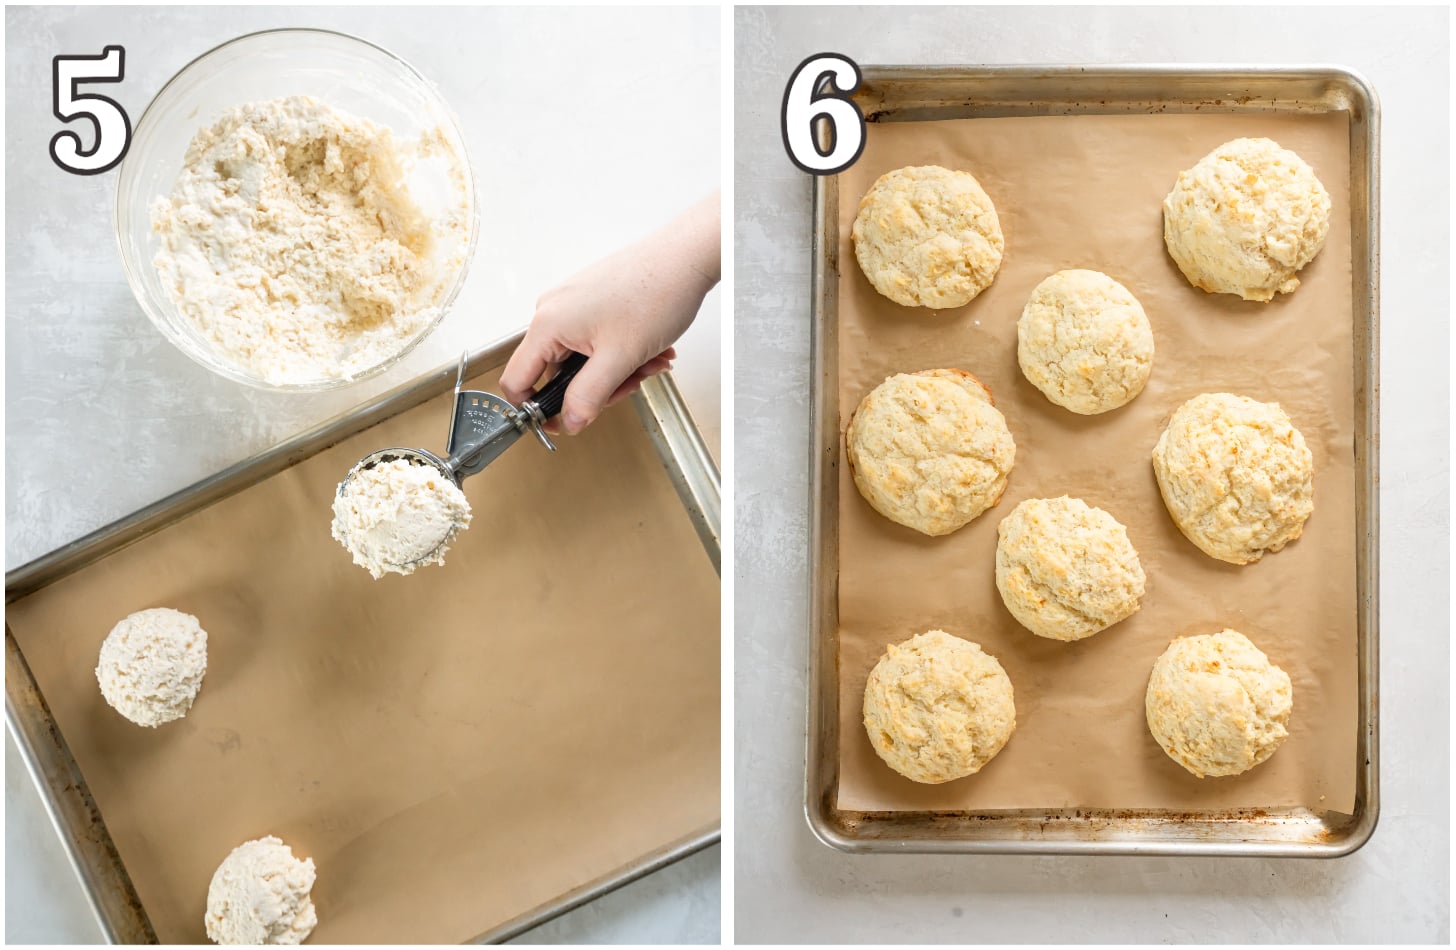 two photos showing buttermilk drop biscuits on baking sheet before and after baking.